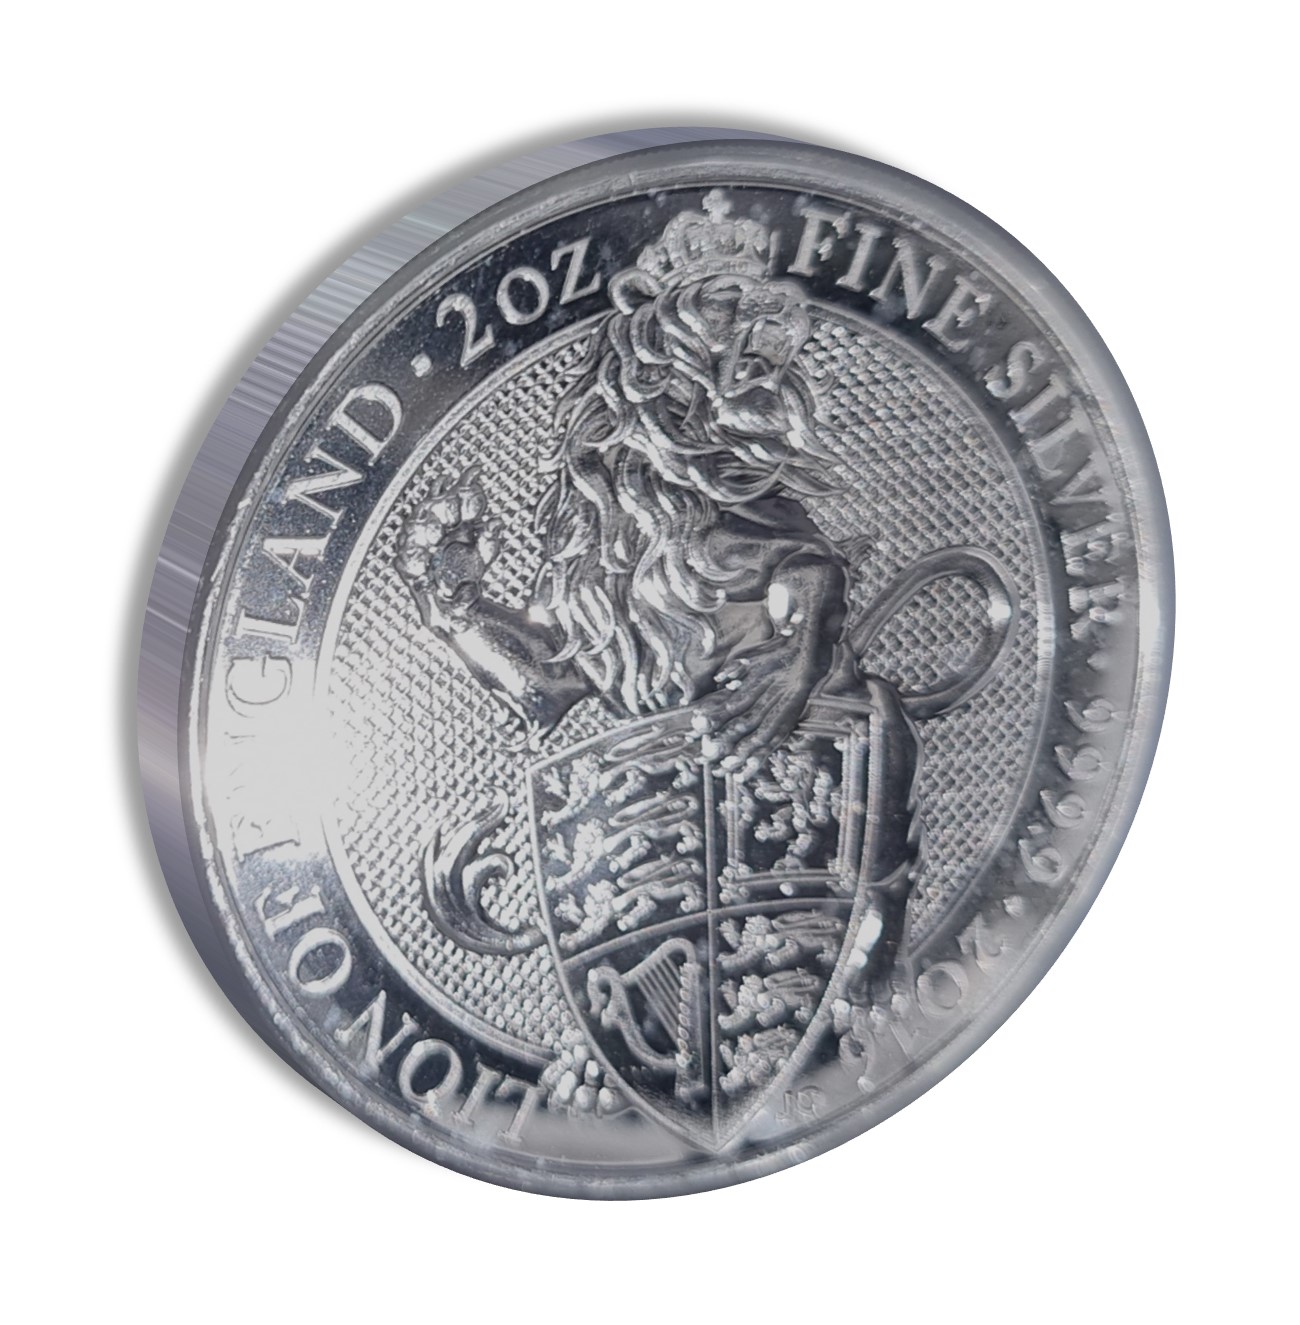 2016 Queen's Beasts Lion Of England 2 oz Silver Coin